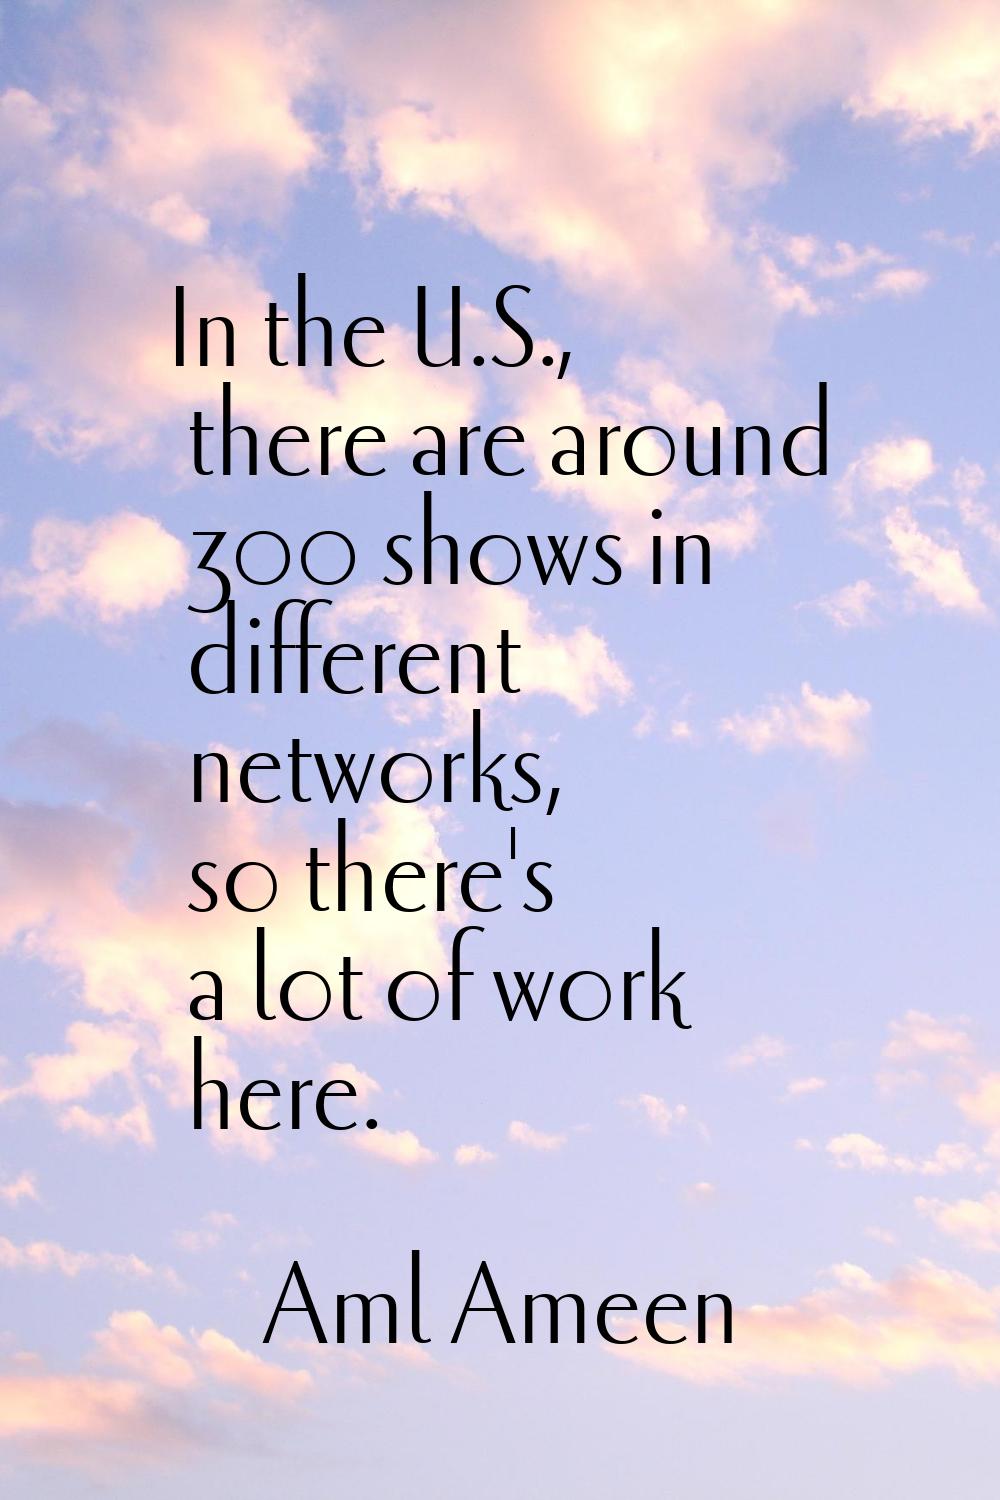 In the U.S., there are around 300 shows in different networks, so there's a lot of work here.